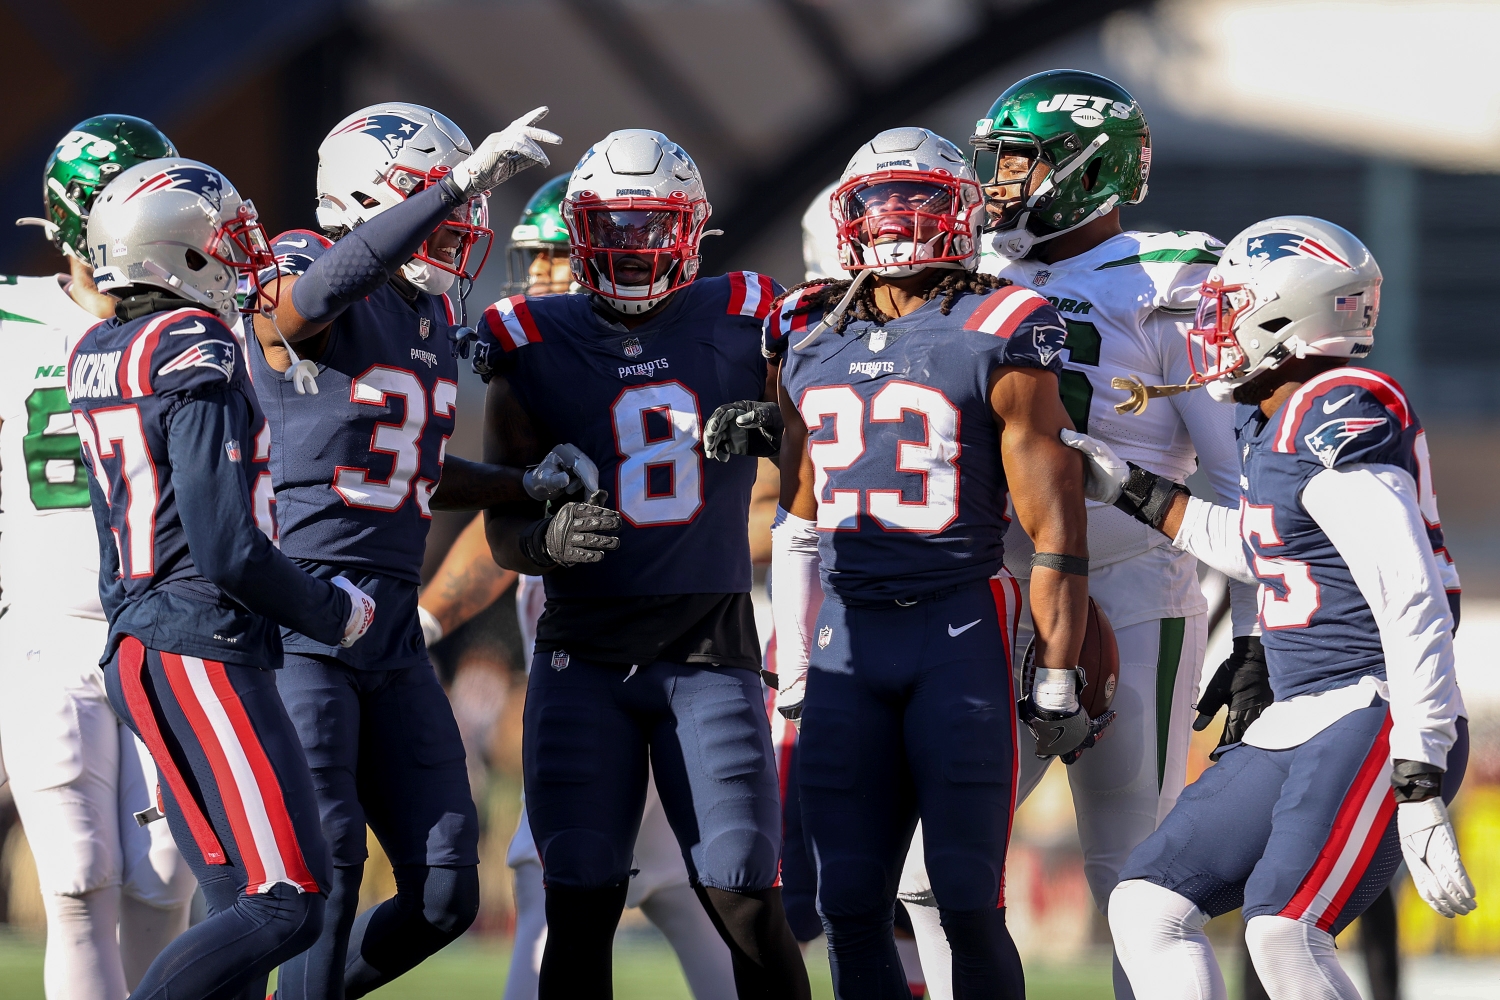 New England Patriots defenders celebrate recording a turnover against the New York Jets.